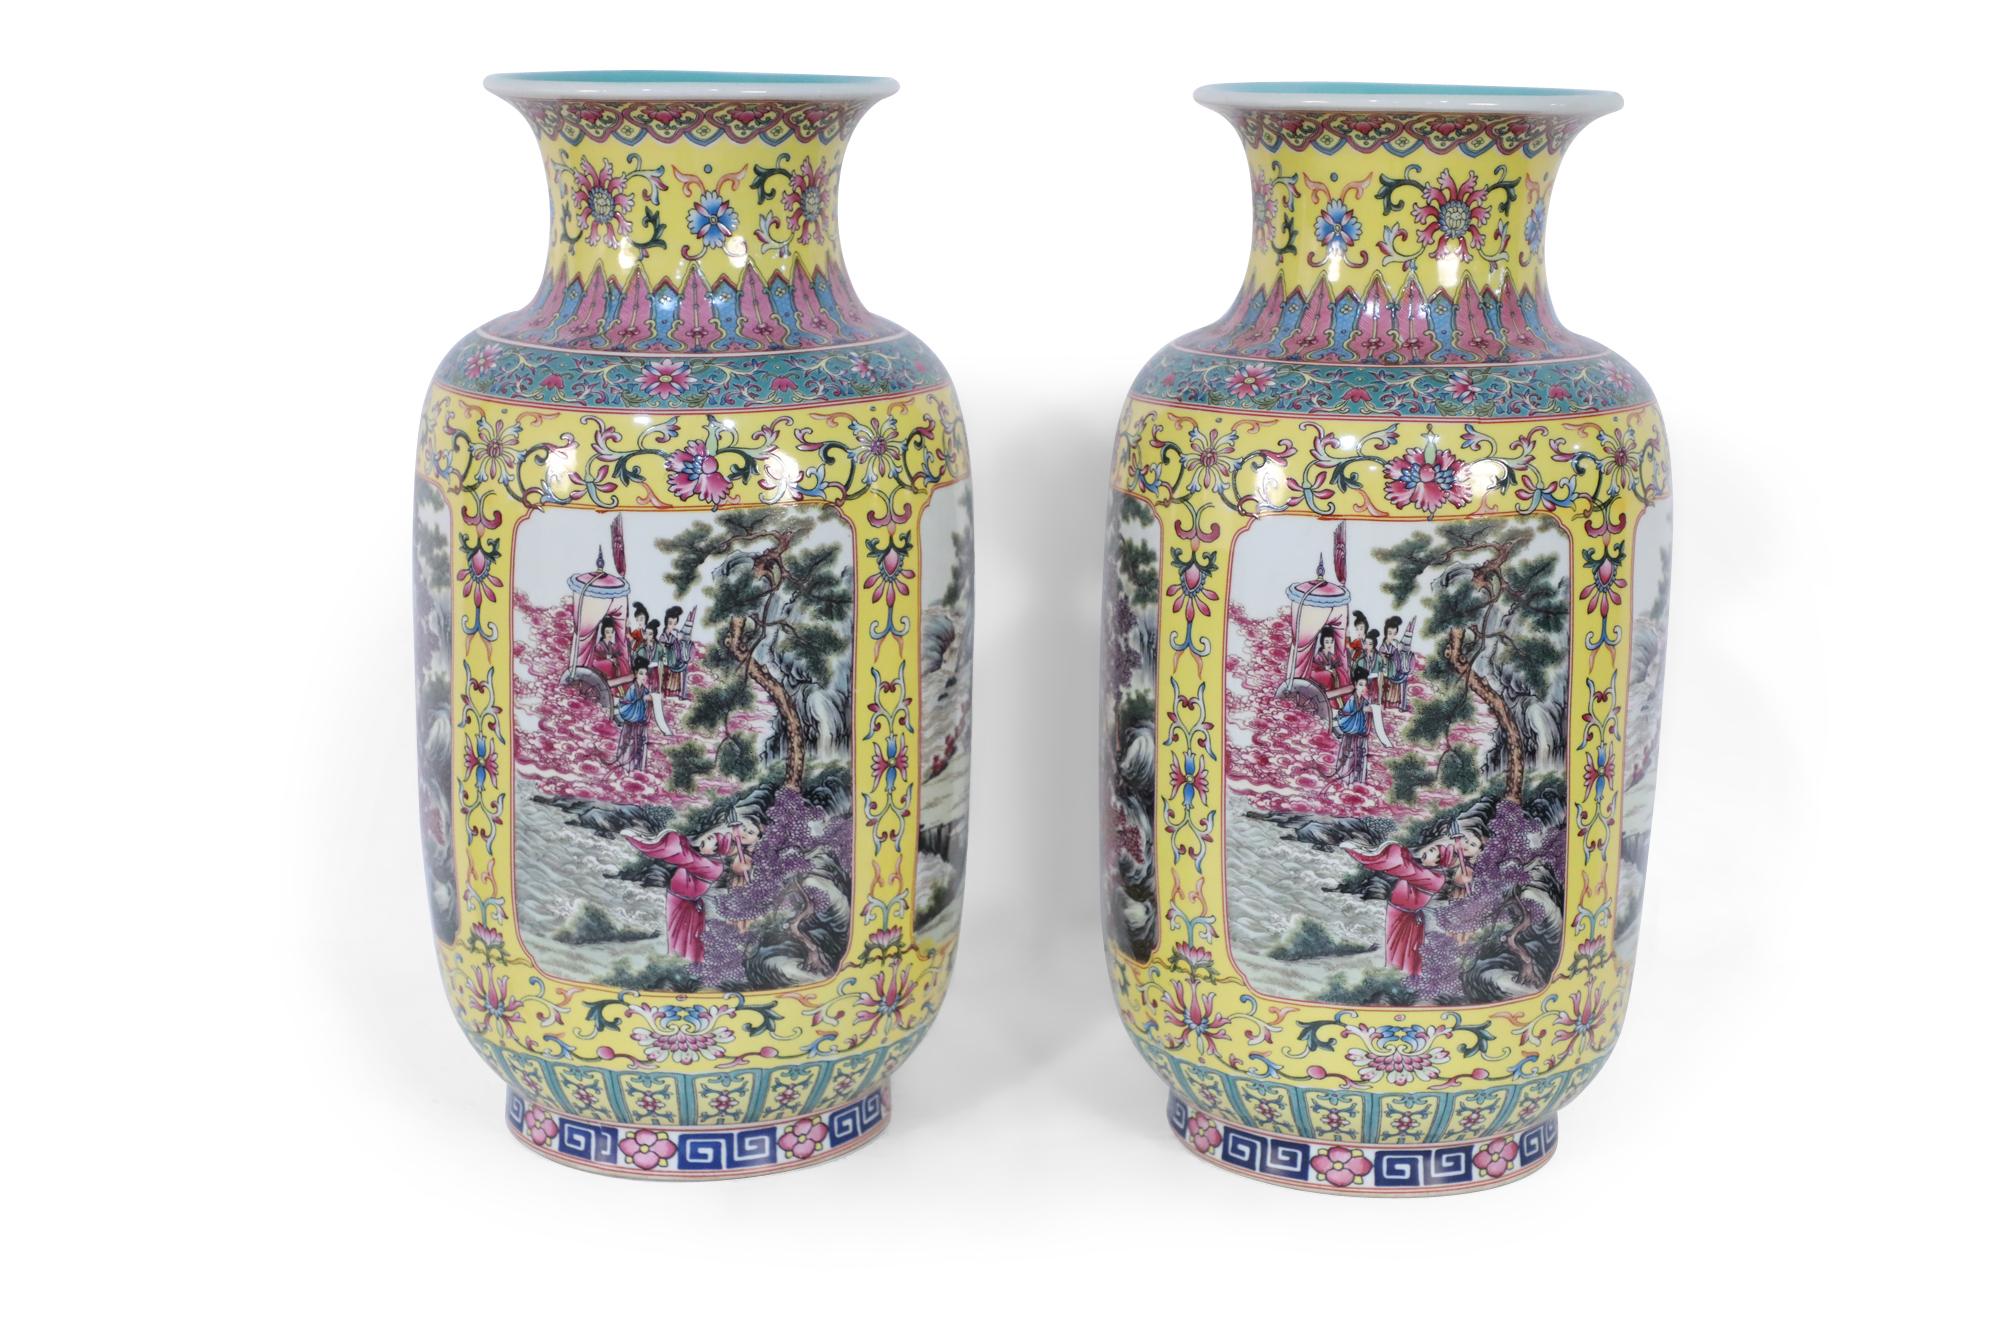 Pair of Chinese Yellow and Turquoise Genre Vignette Porcelain Vases 2